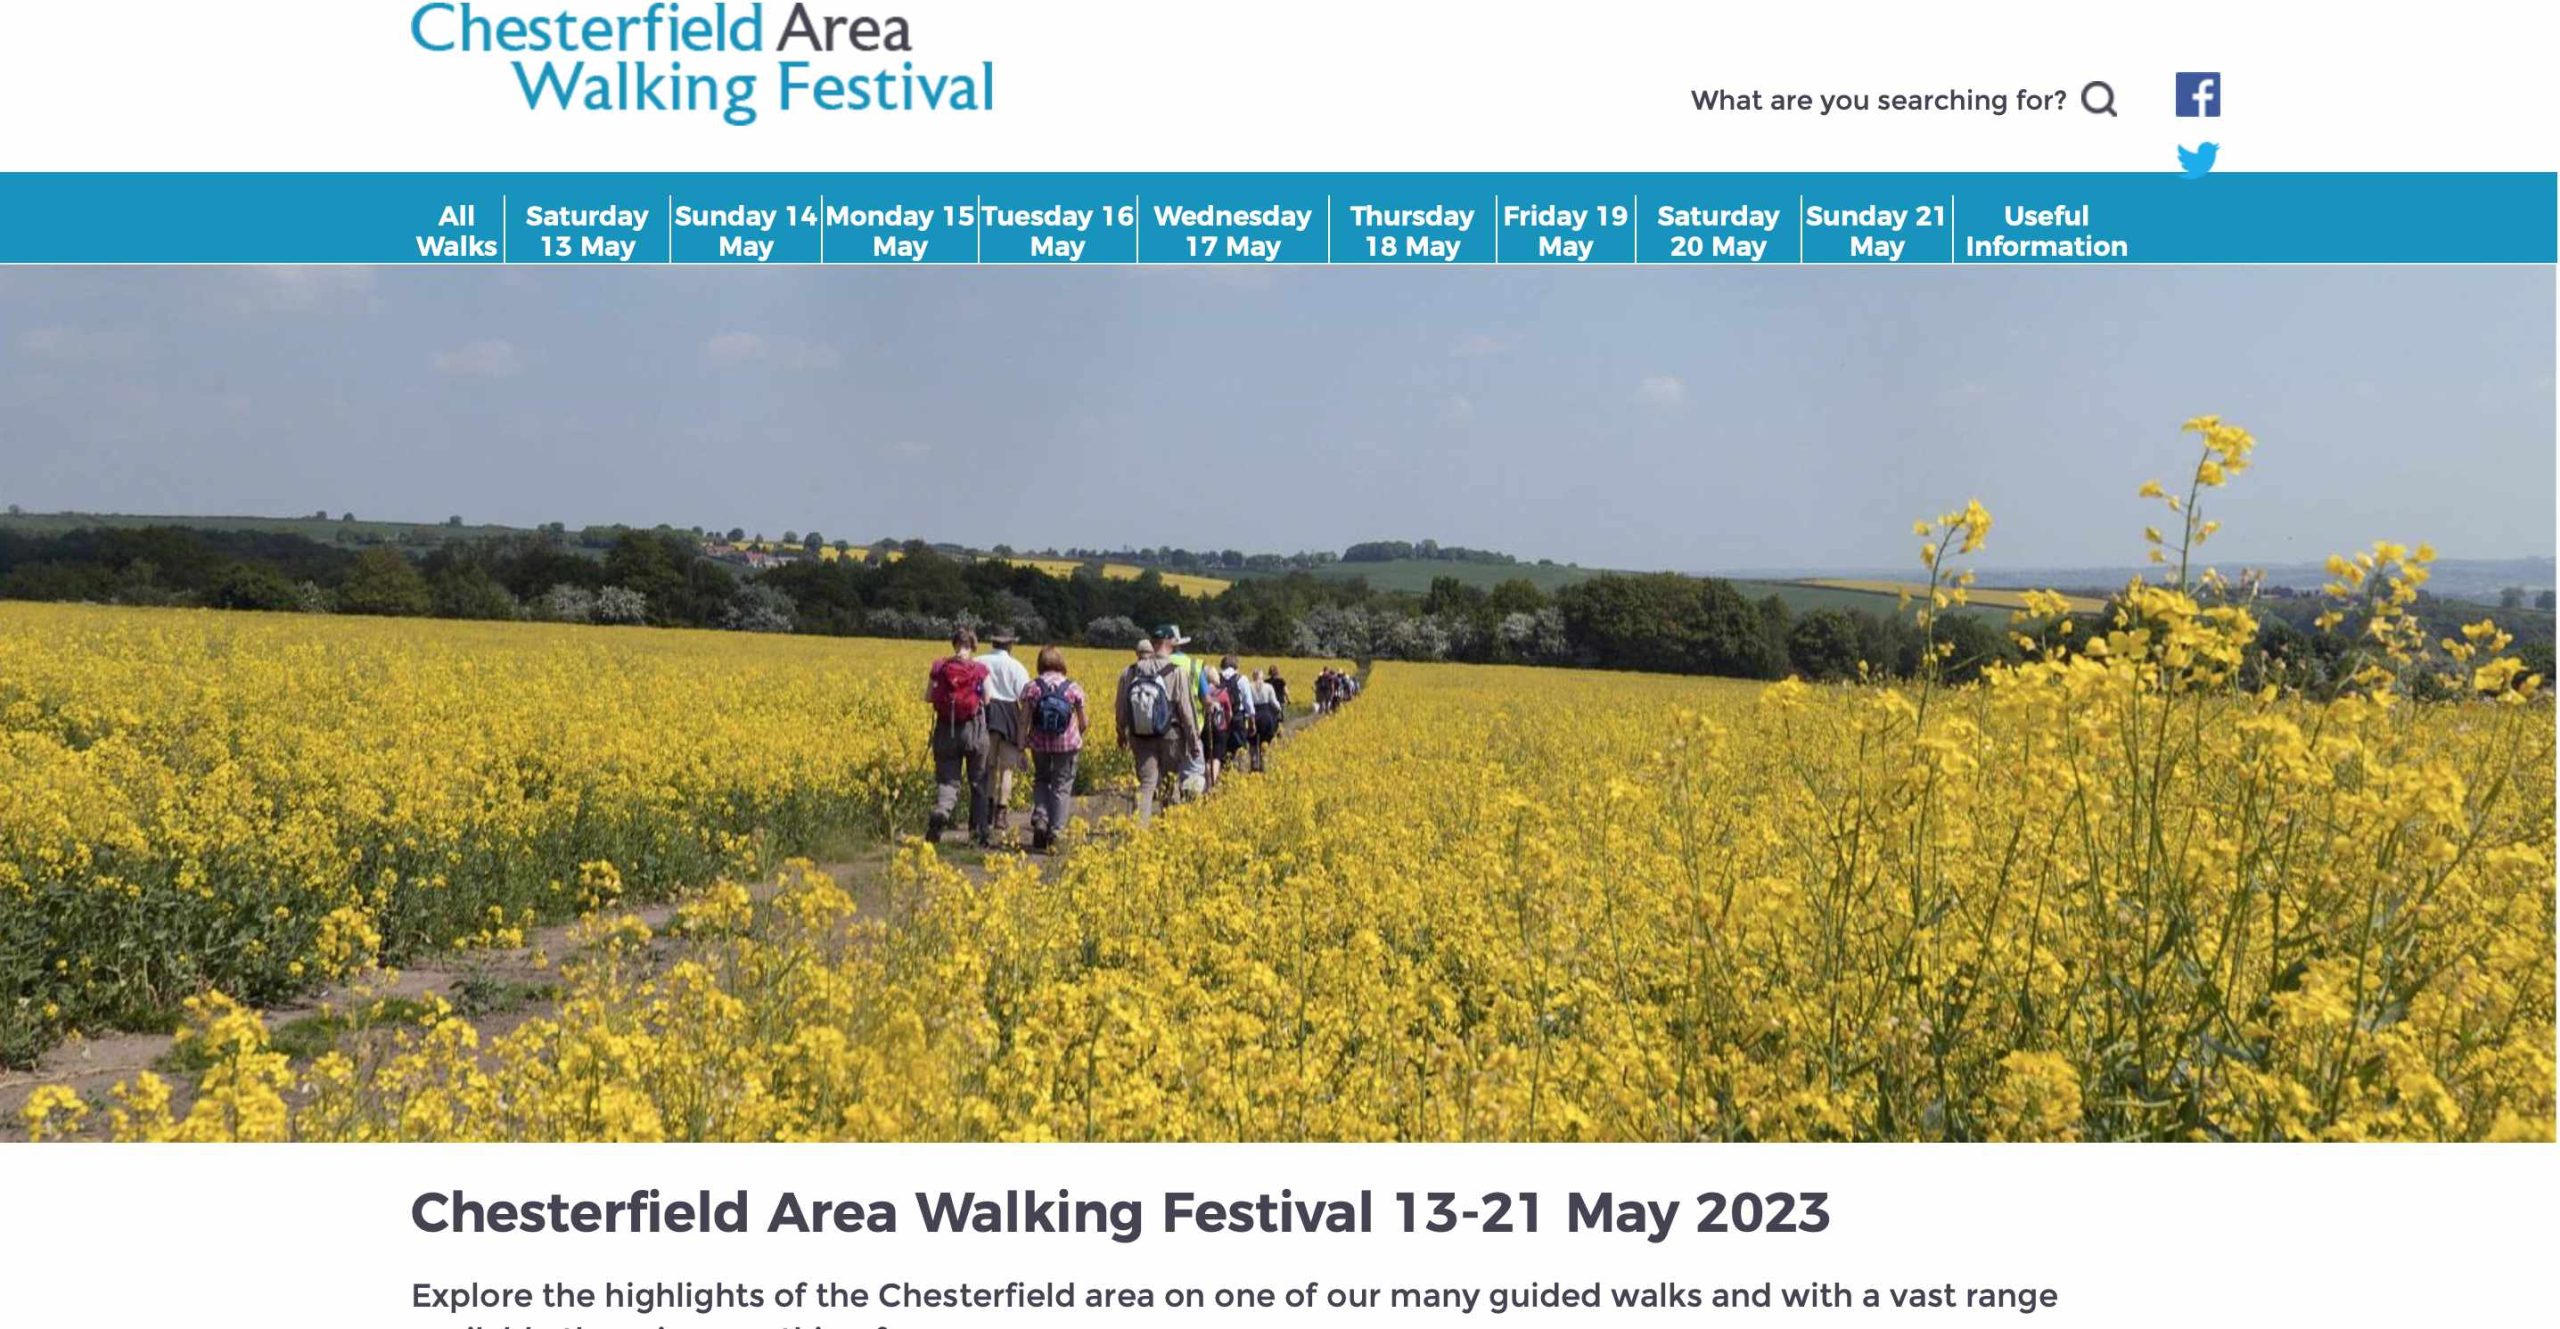 Chesterfield Area Walking Festival 13-21 May 2023